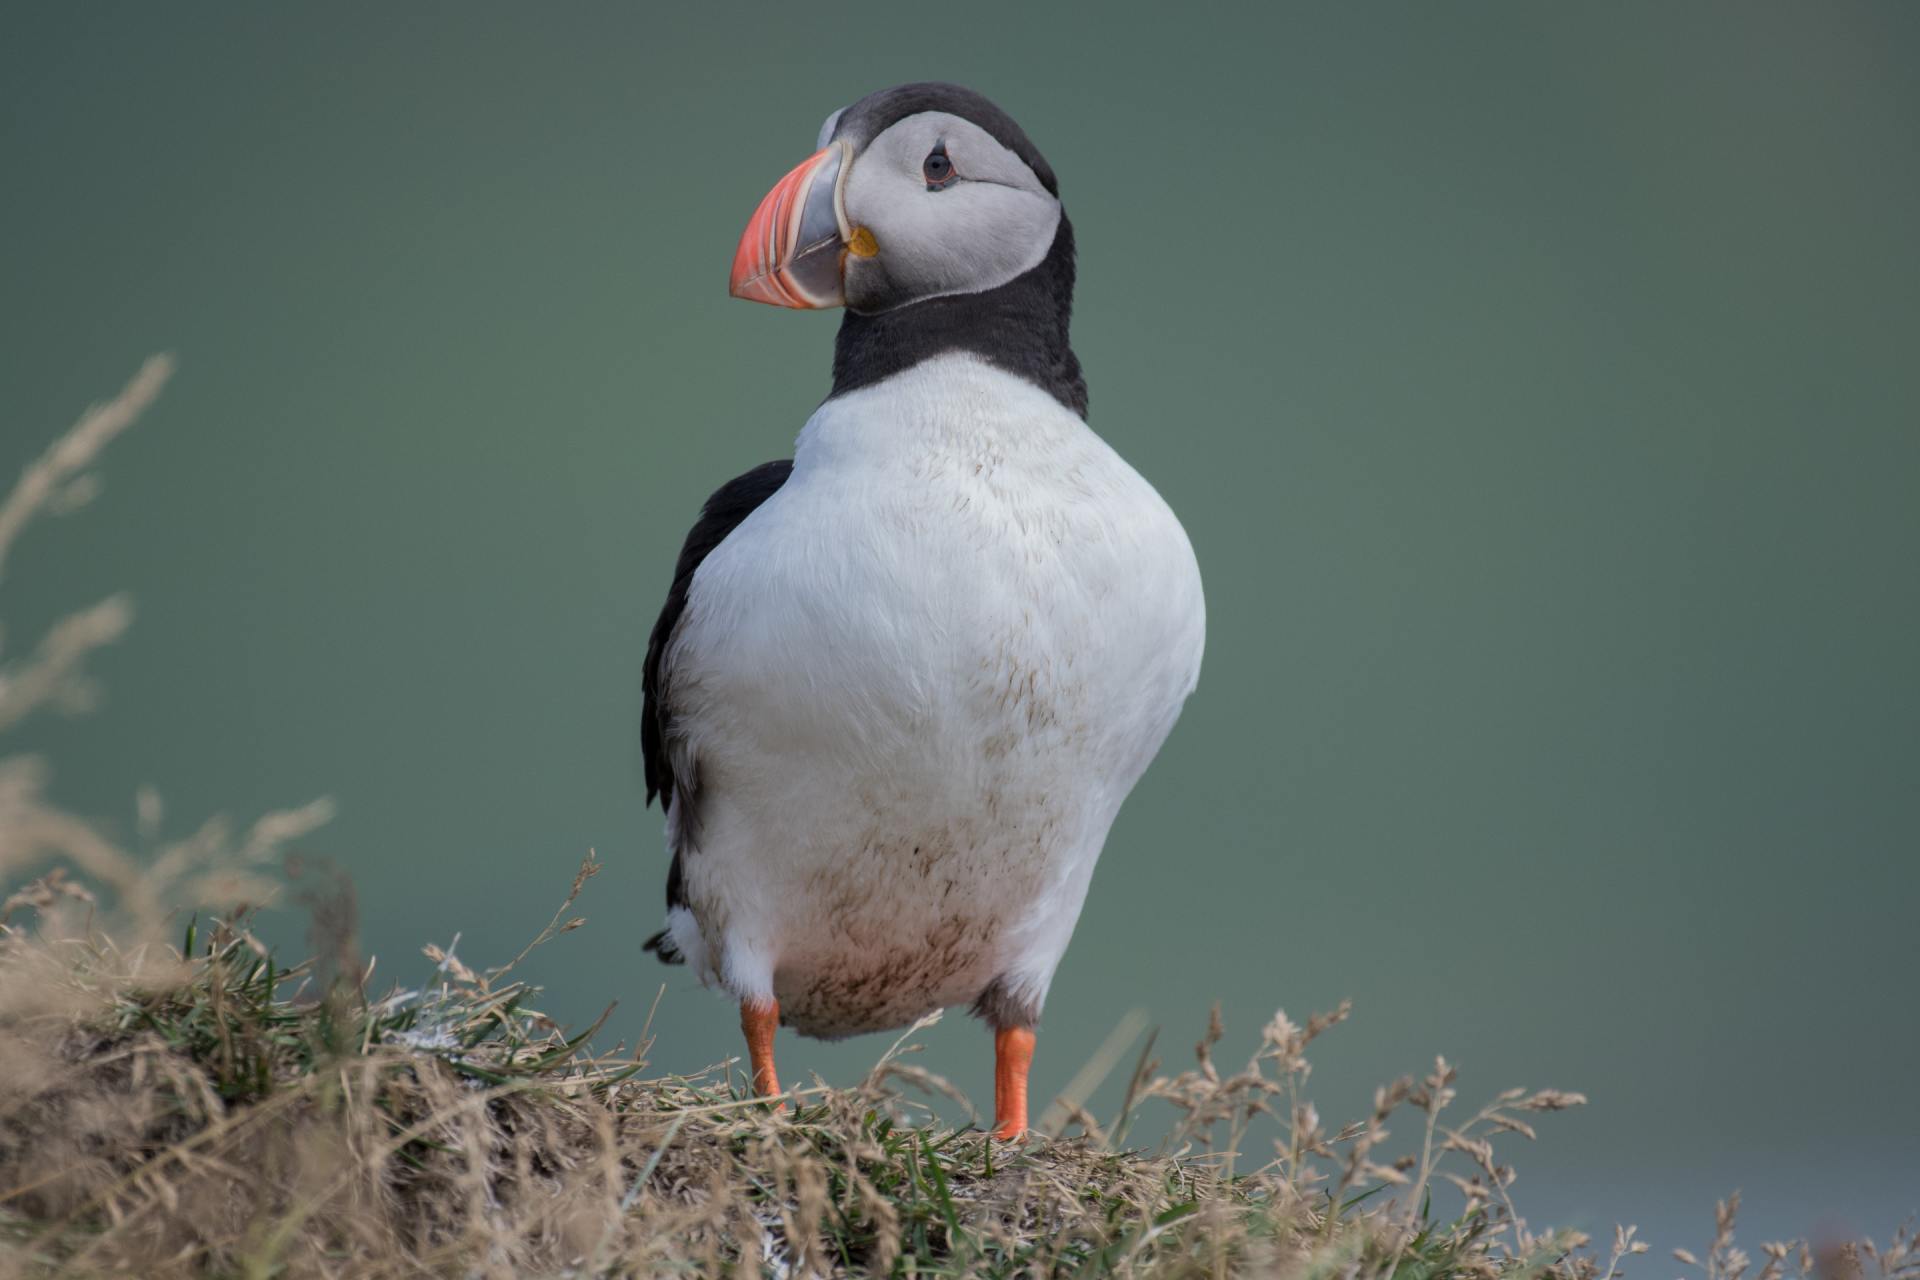 Puffins on the May